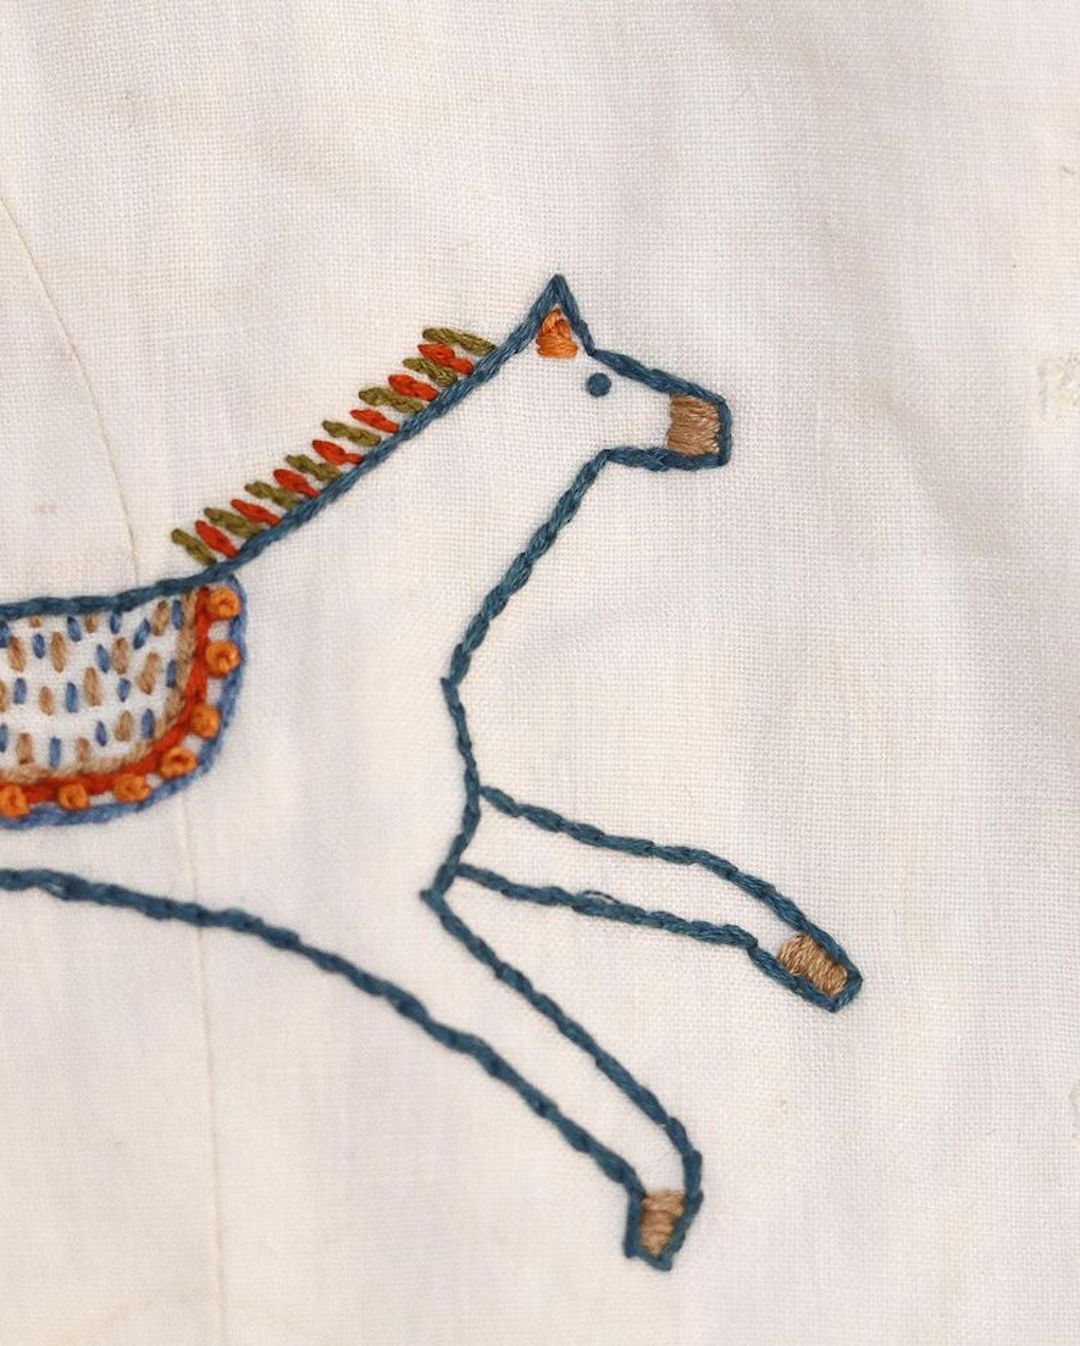 Embroidery on clothing by Madeleine Kemsley